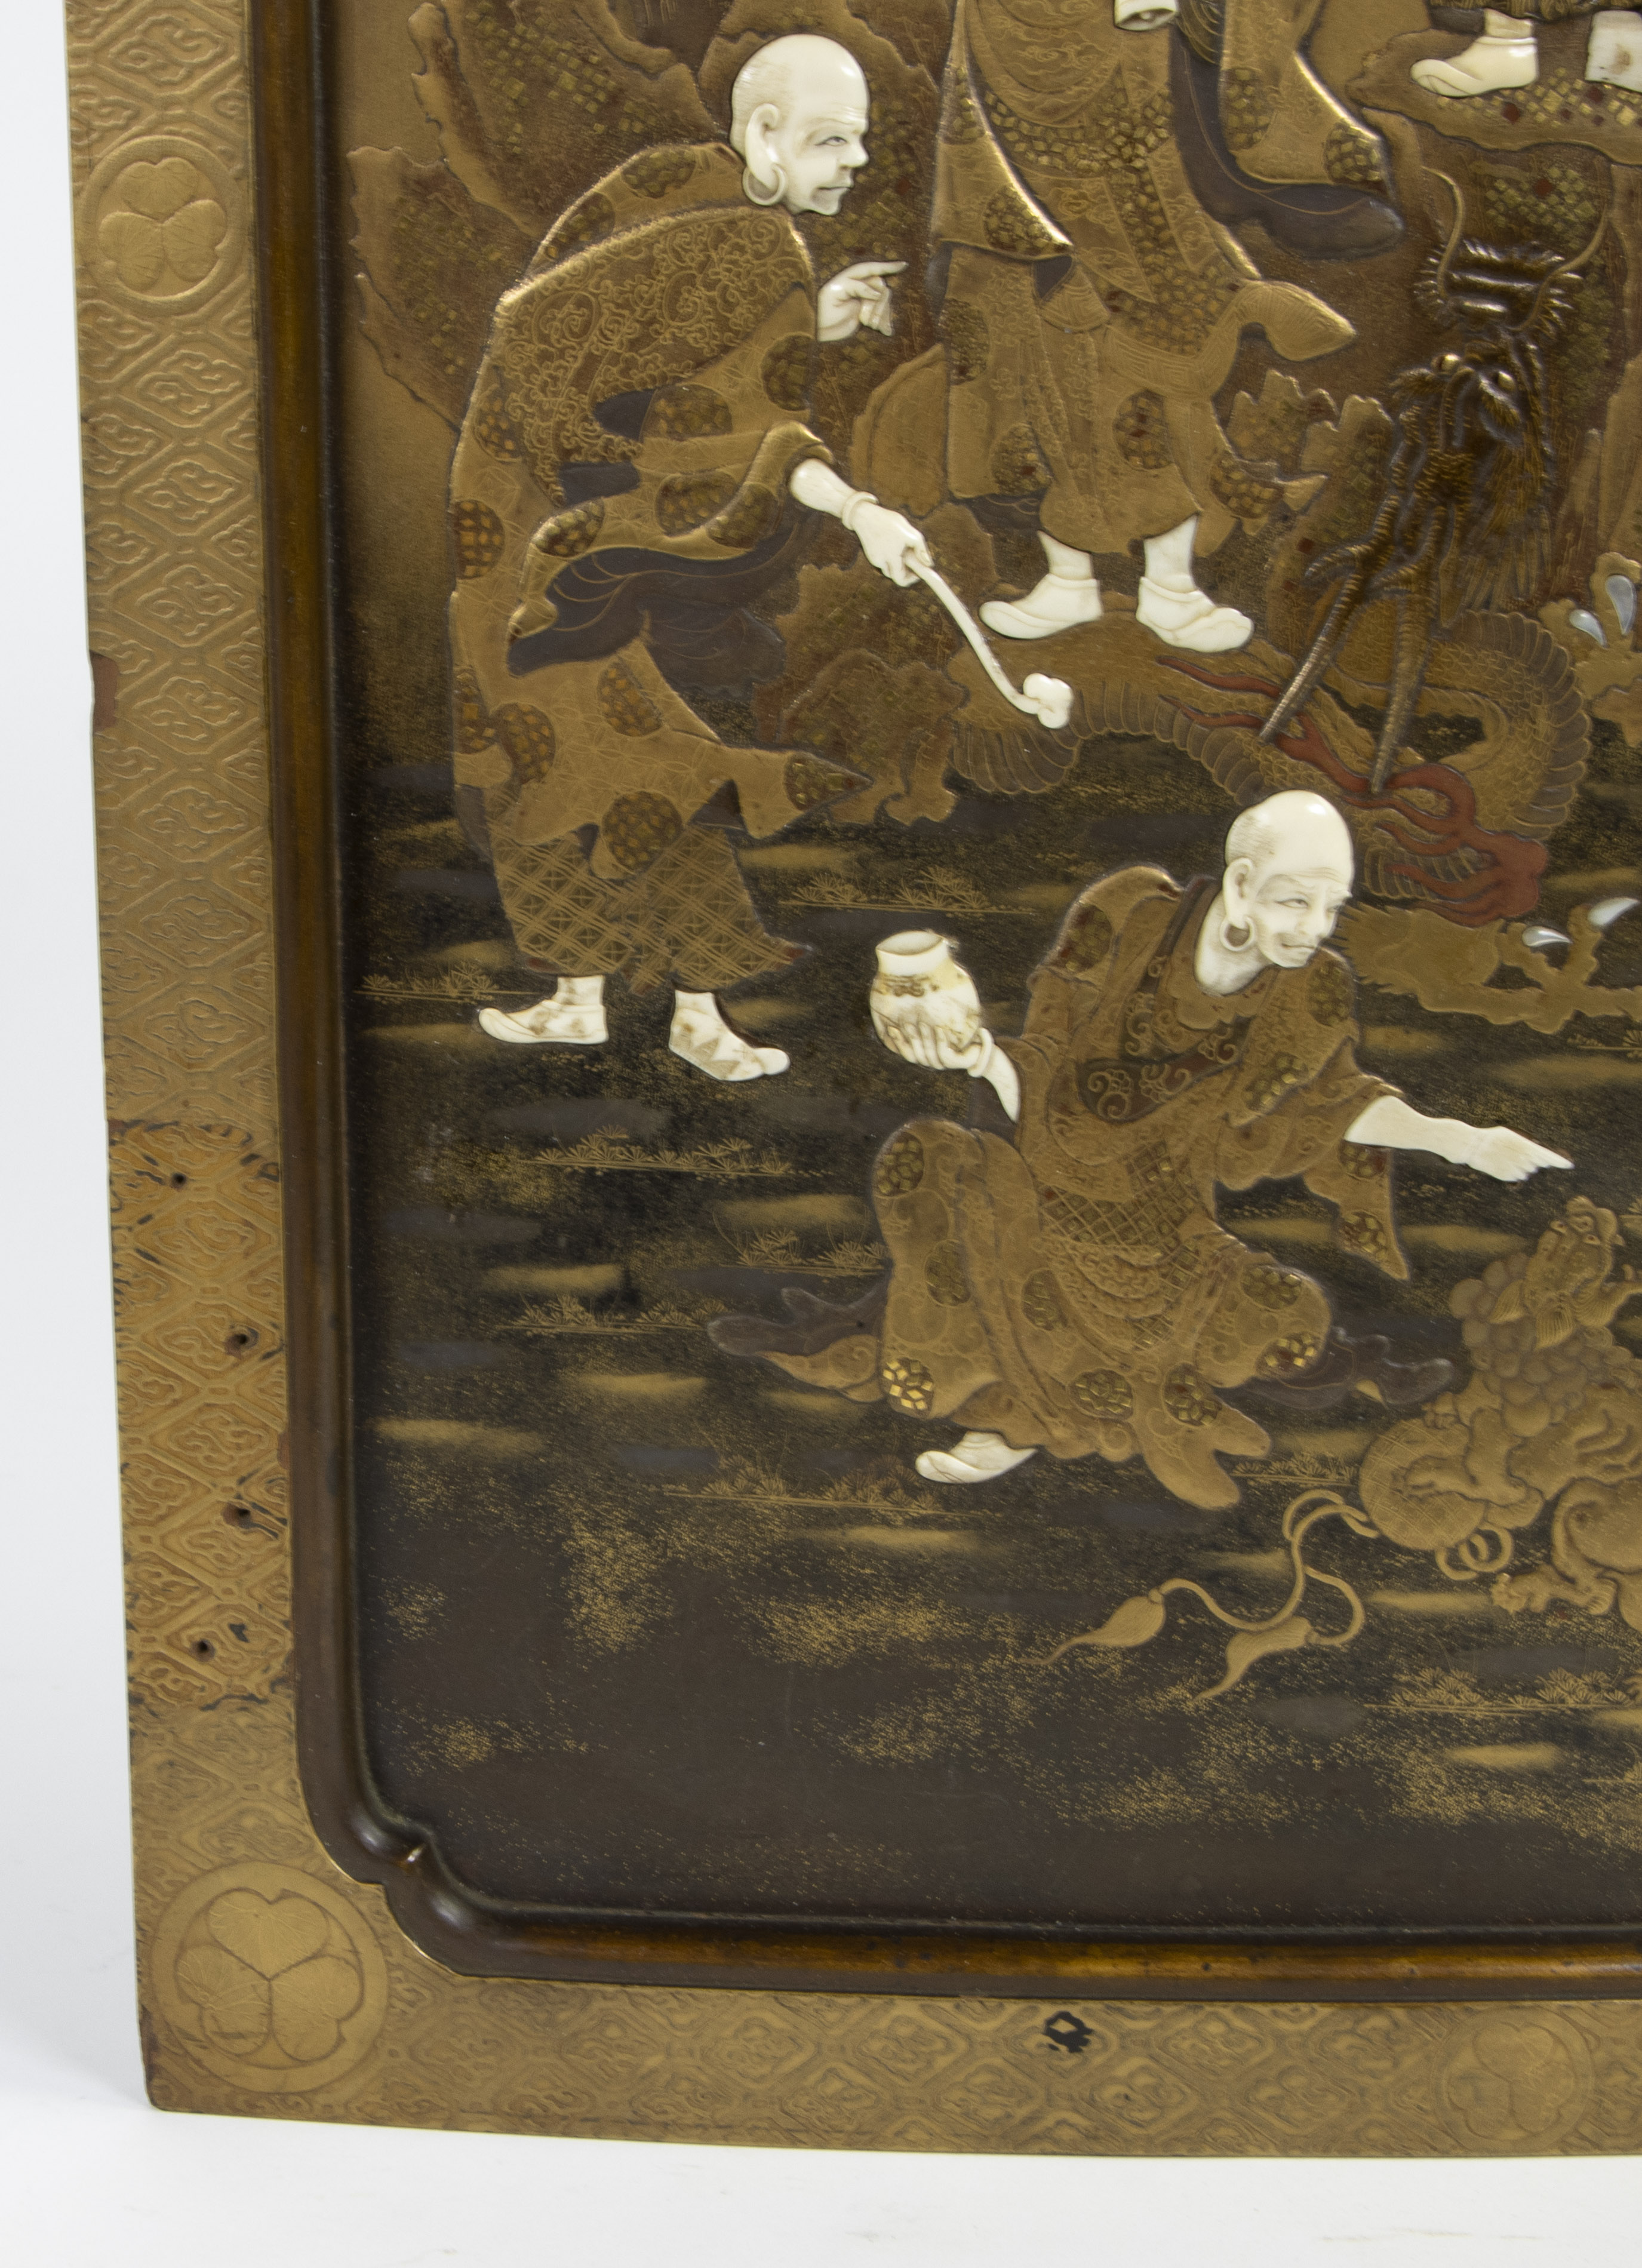 Lacquer cabinet door panel 19th century depicting 7 sage Gods with ivory heads and arms, Japanese Im - Image 4 of 10